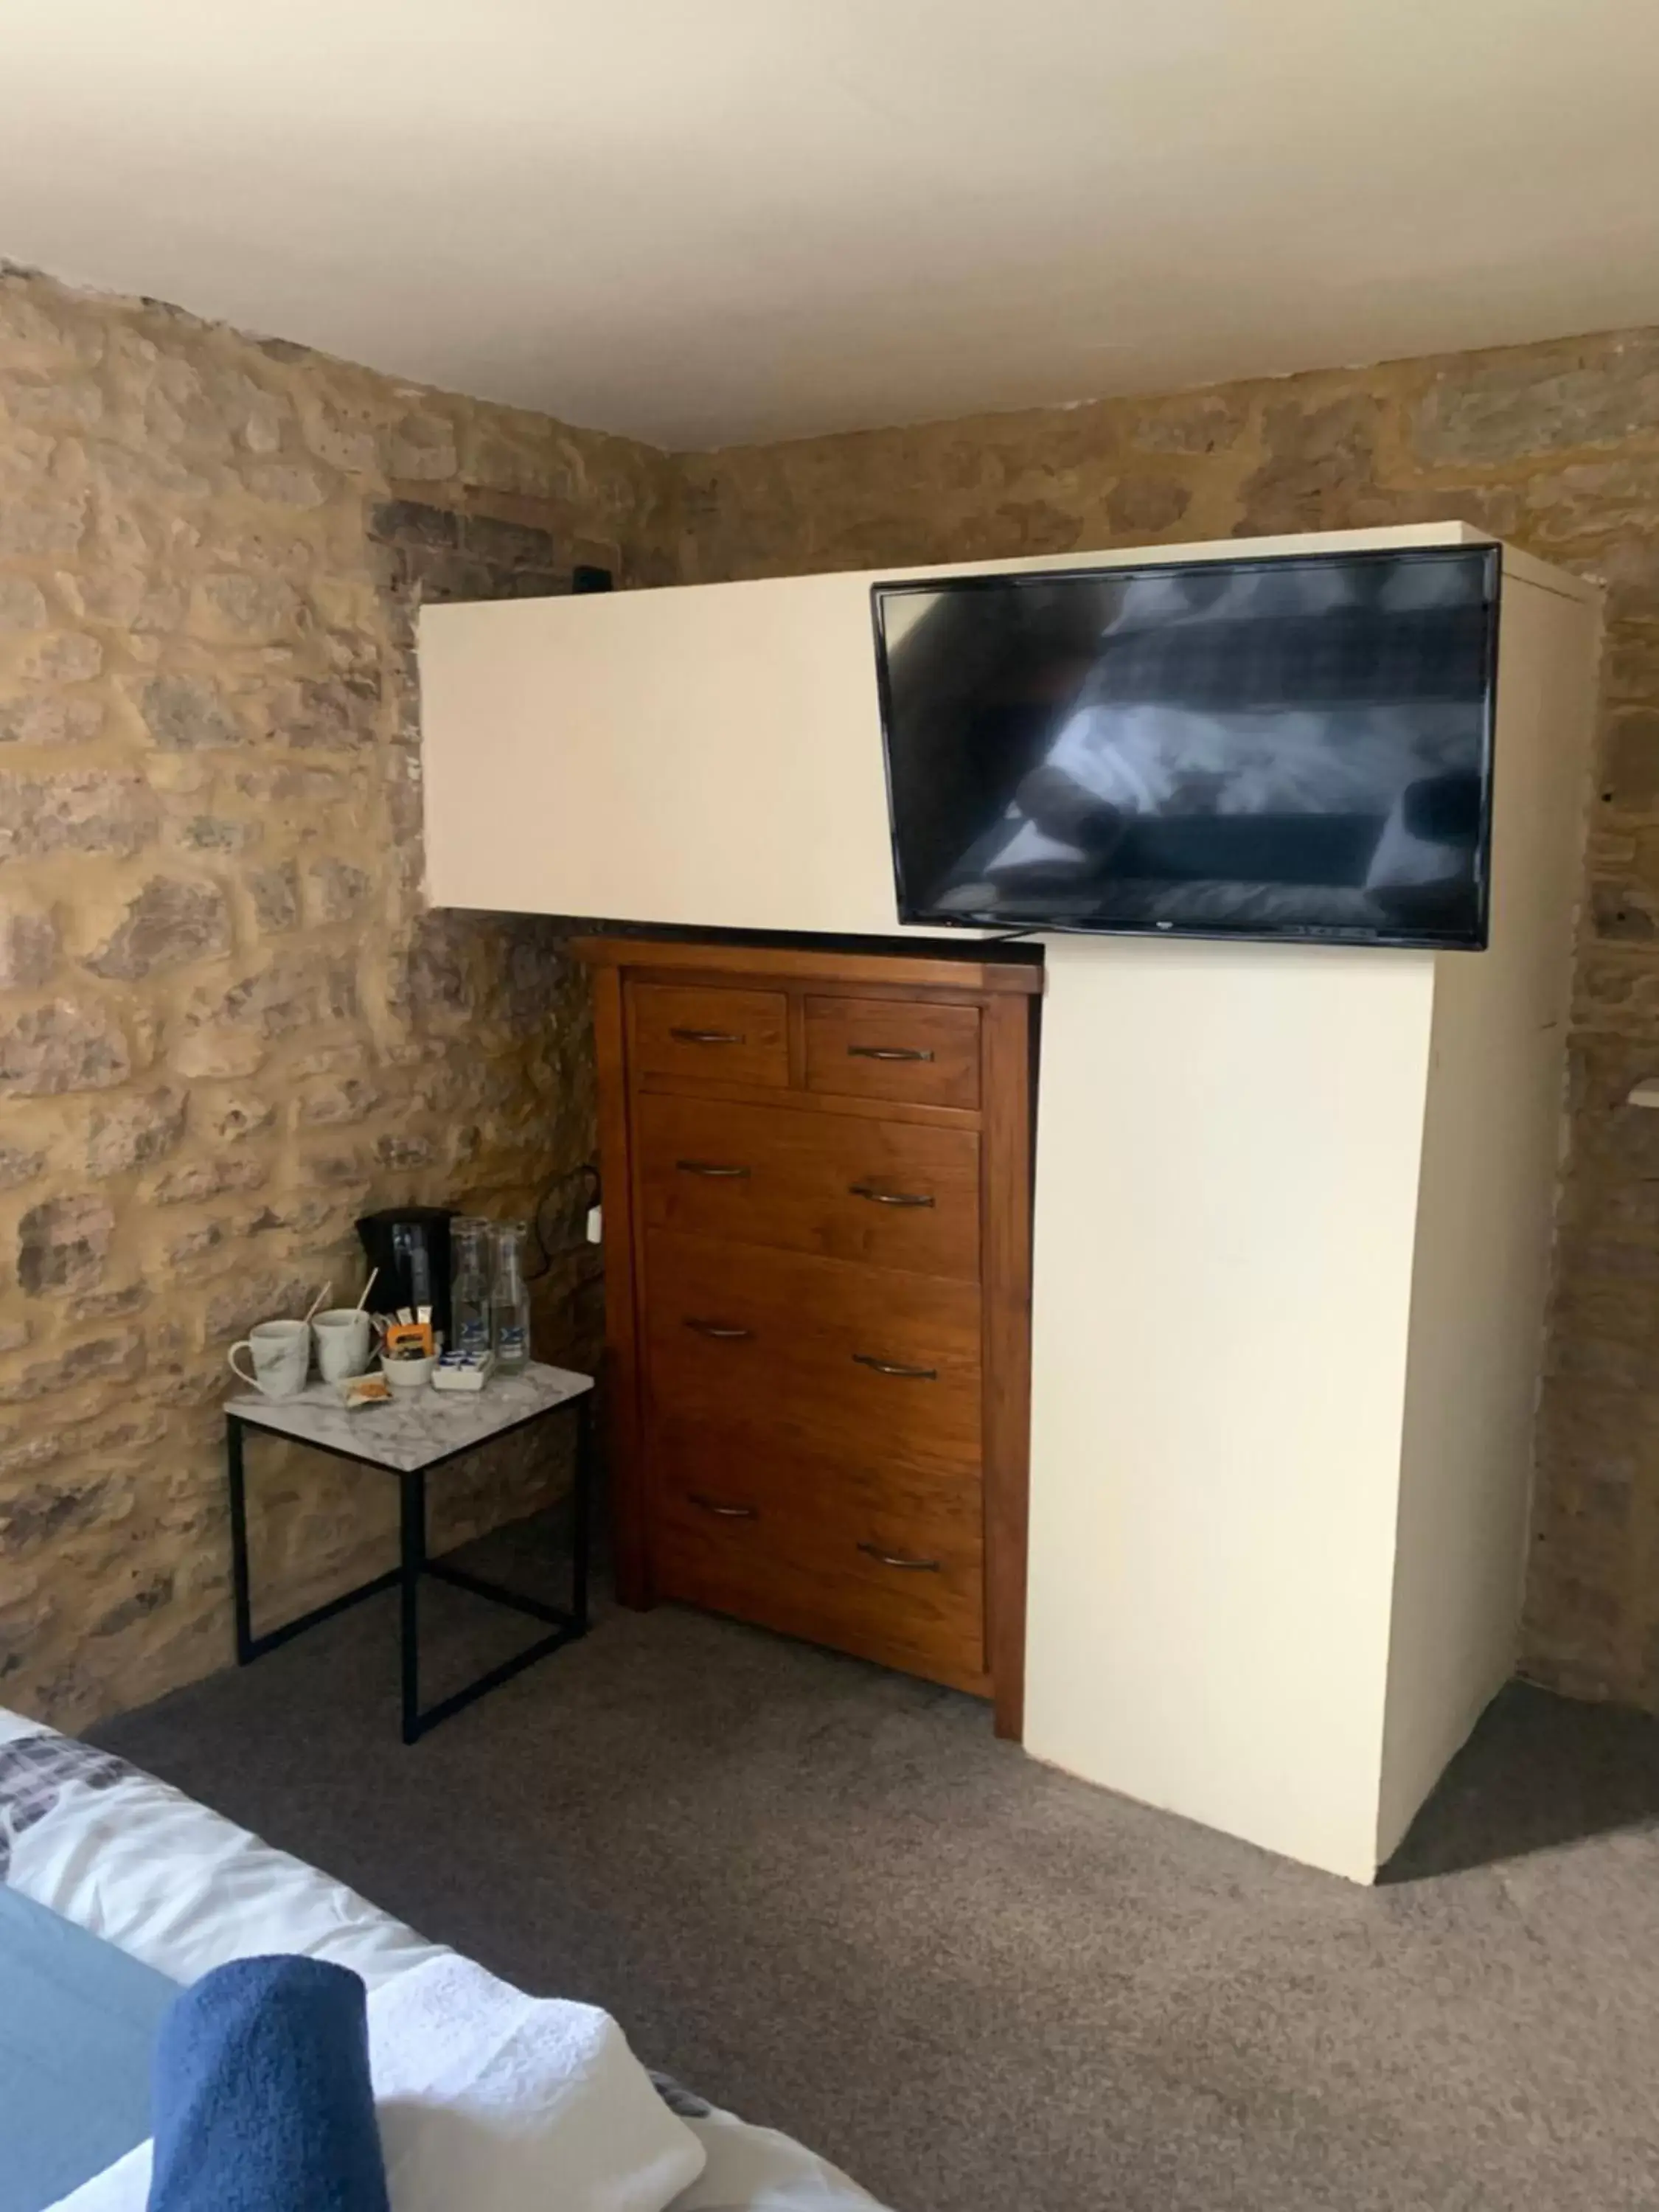 TV and multimedia, TV/Entertainment Center in Crosskeys Inn Guest Rooms in Wye Valley